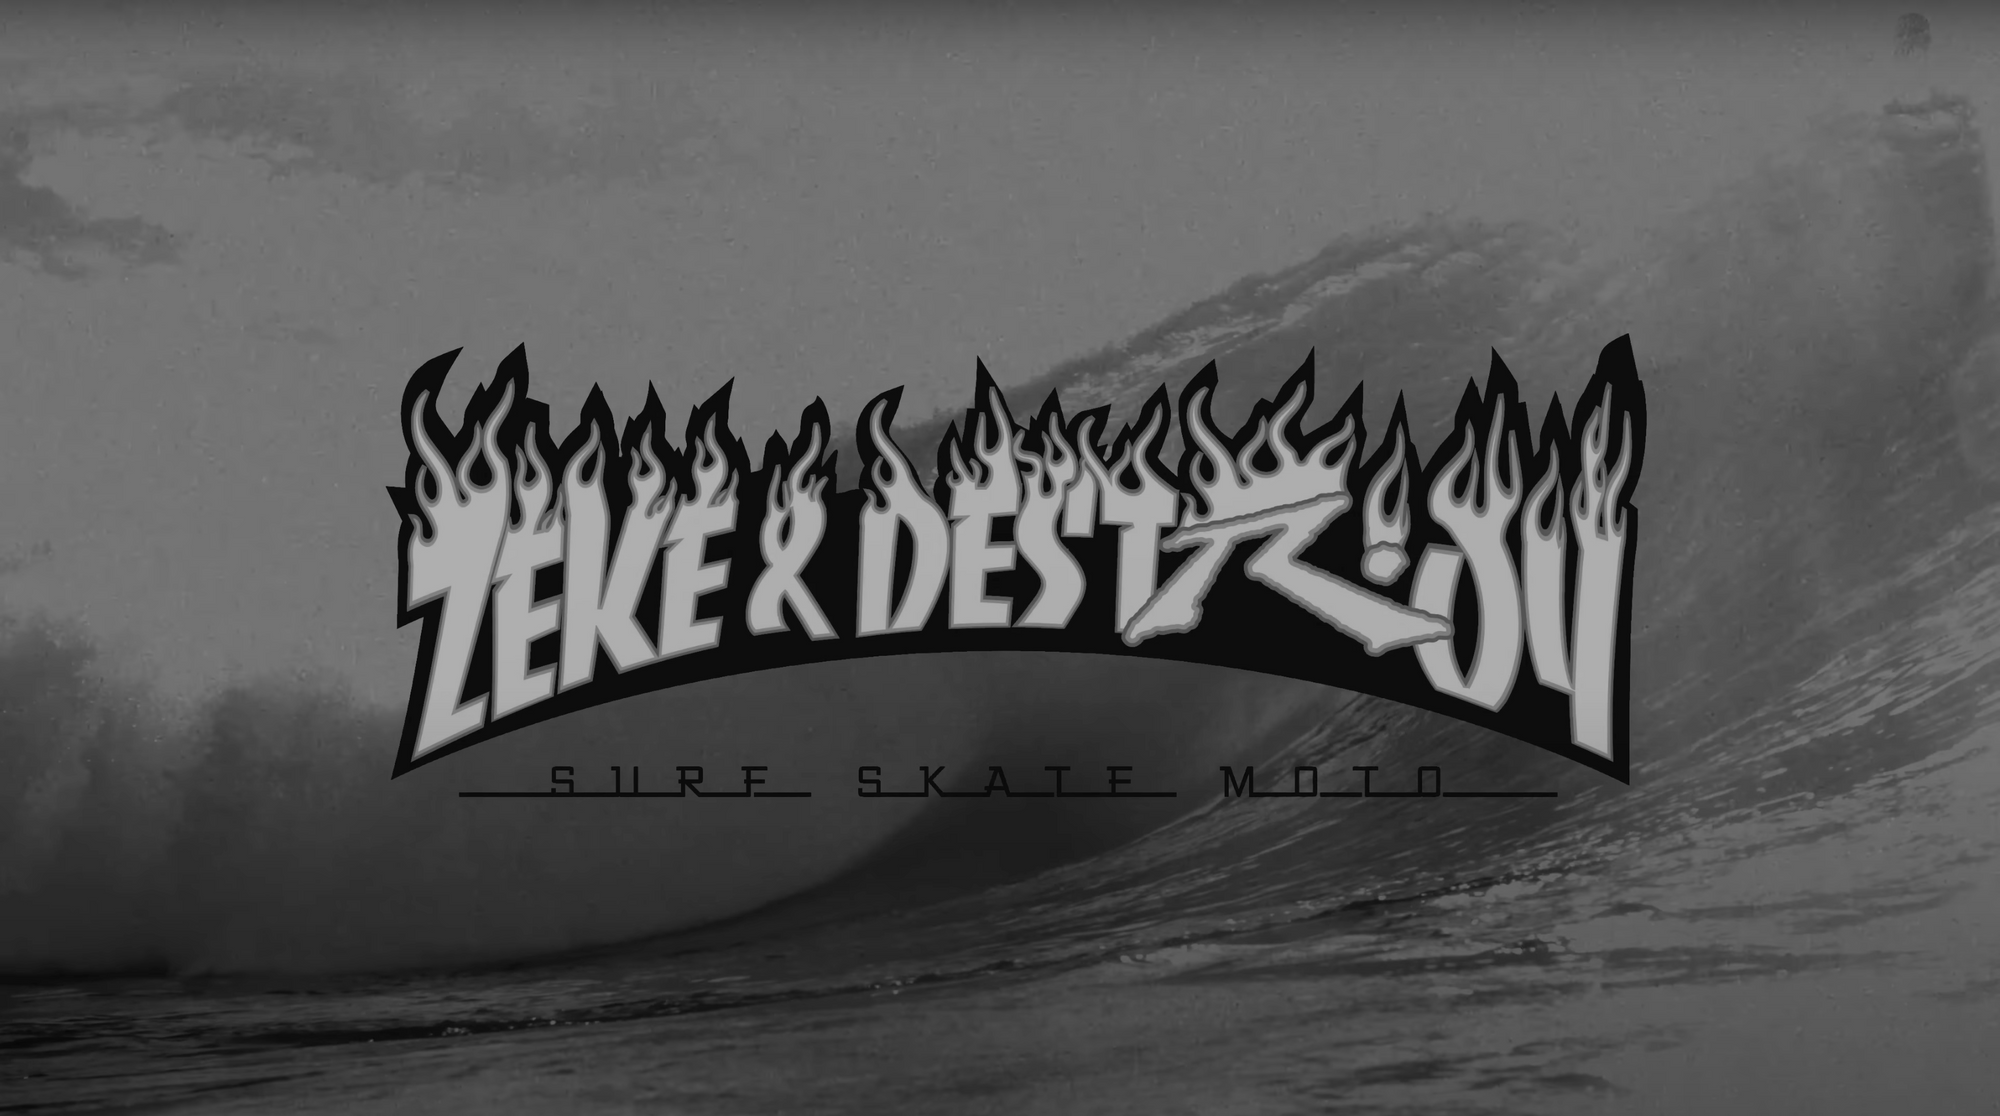 What boards are featured in Zeke & Destroy?